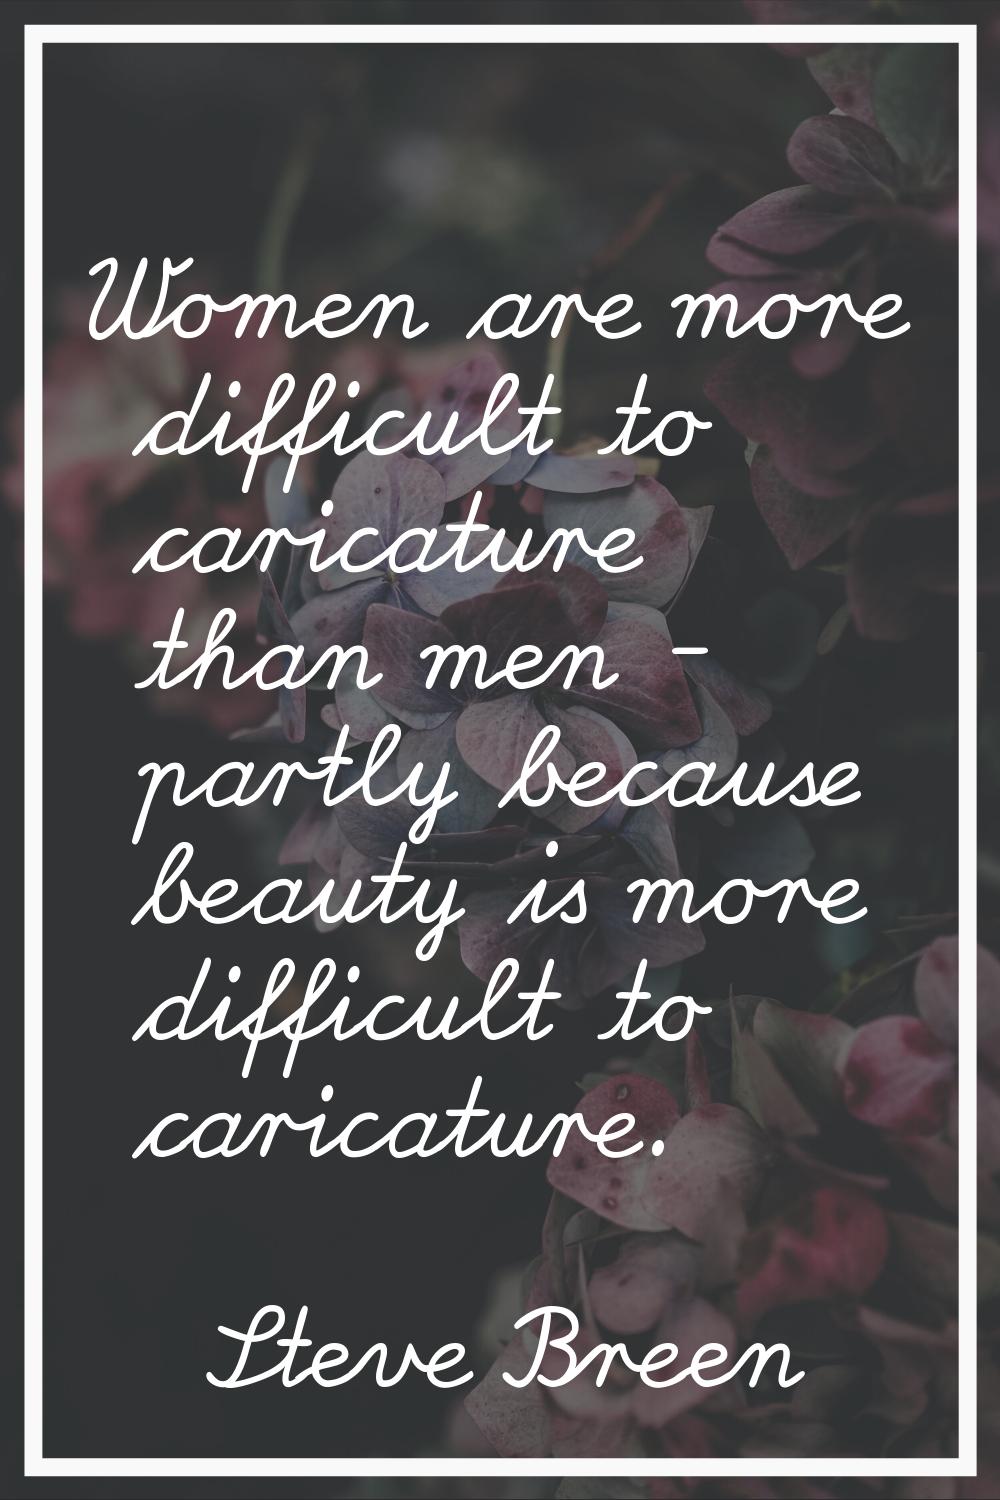 Women are more difficult to caricature than men - partly because beauty is more difficult to carica